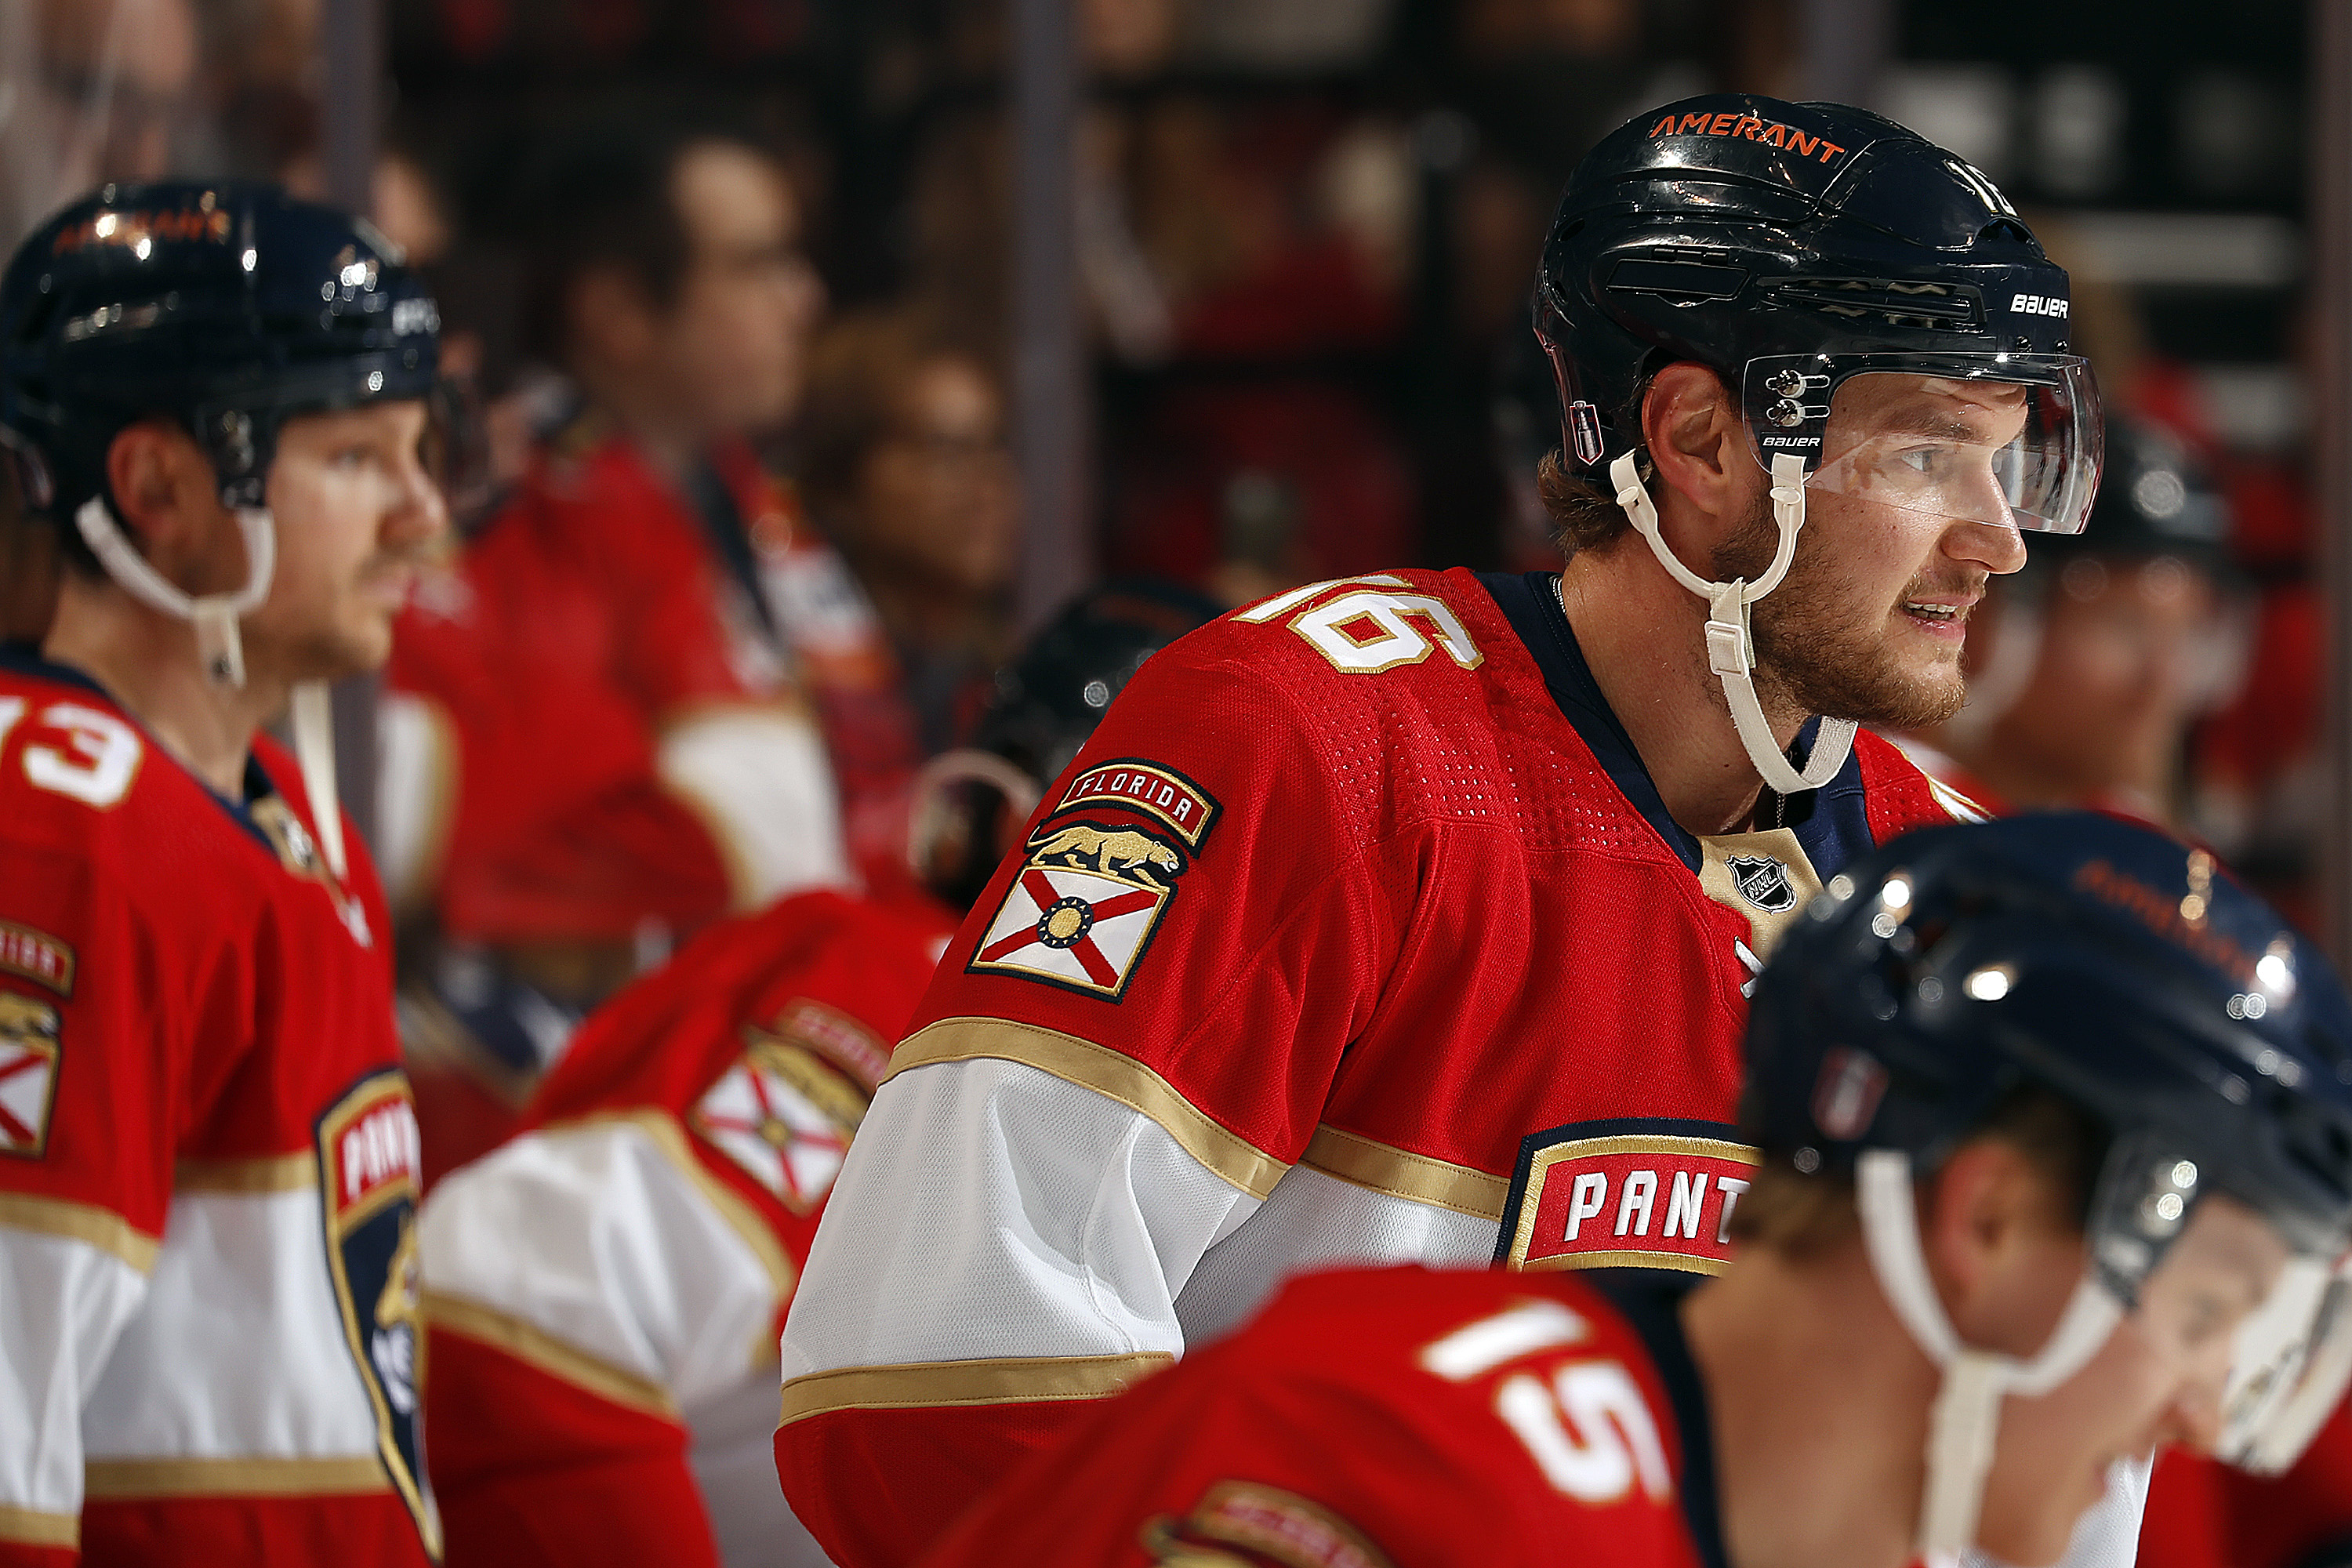 Aleksander Barkov #16 of the Florida Panthers skates the ice with teammates during warm ups prior to hosting the Washington Capitals in Game Five of the First Round of the 2022 Stanley Cup Playoffs at the FLA Live Arena on May 11, 2022 in Sunrise, Florida.